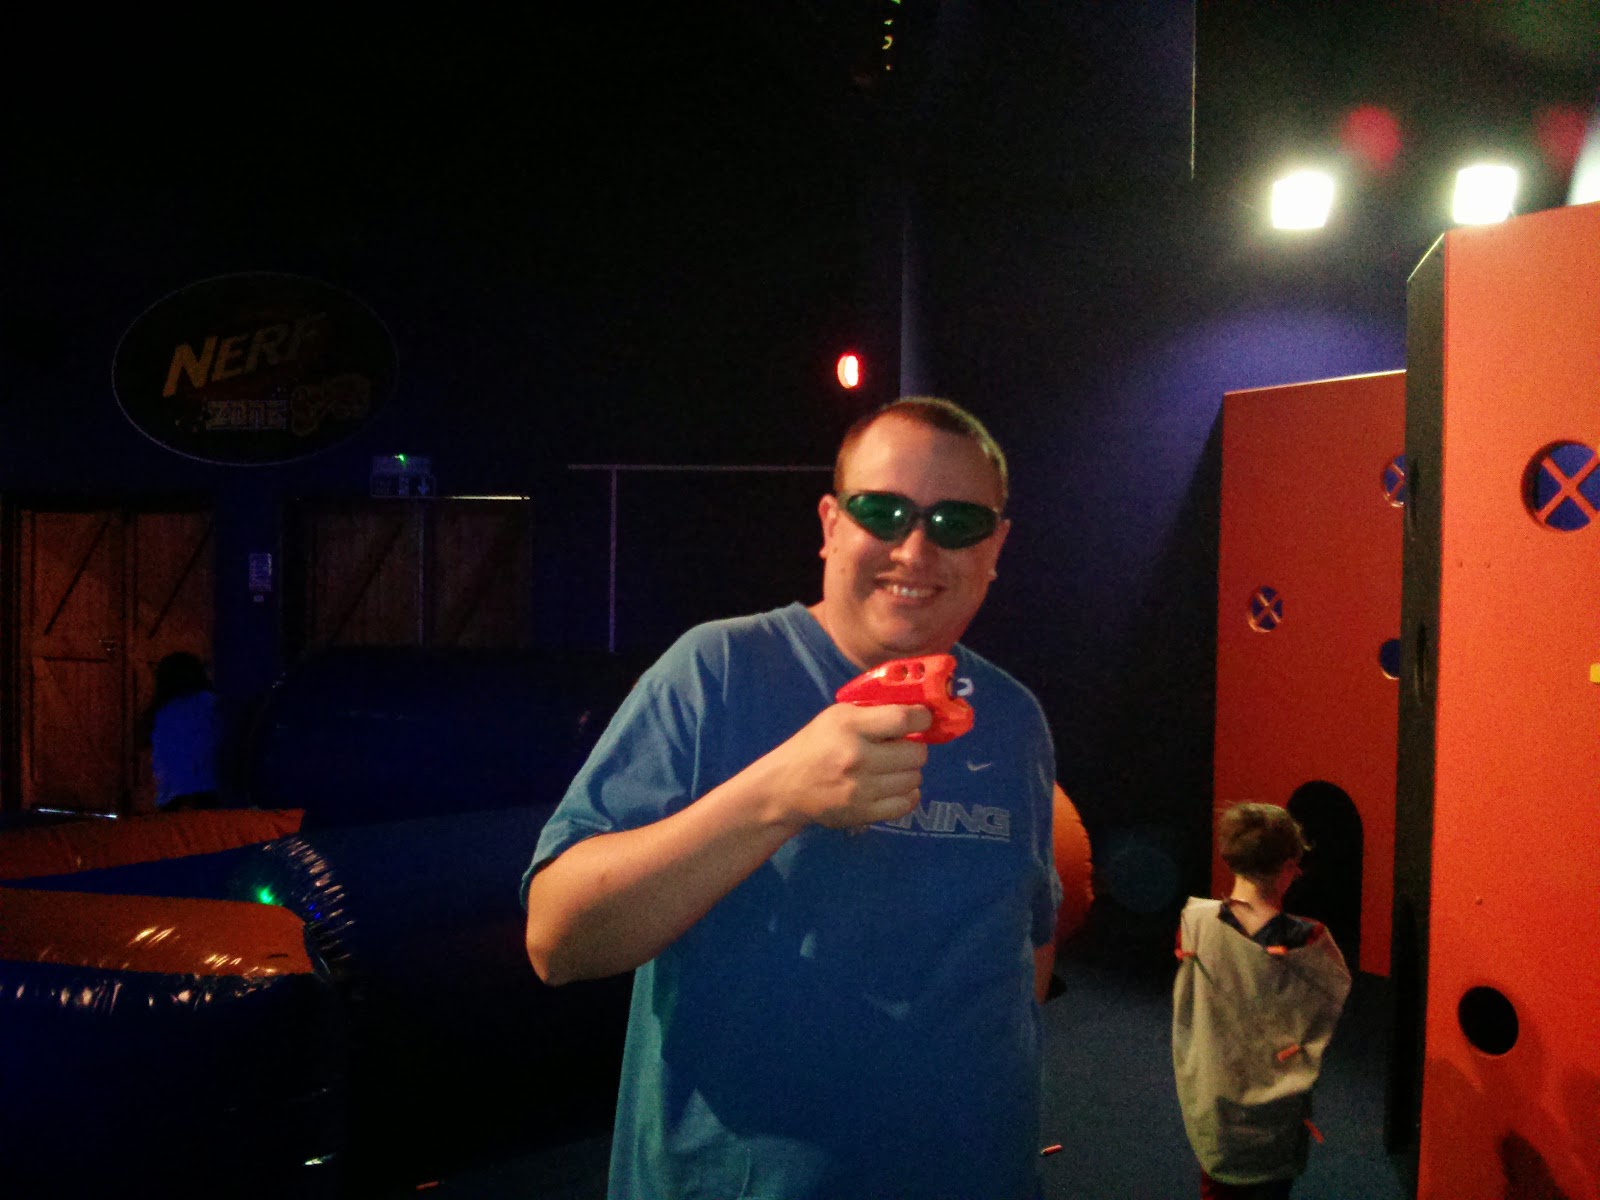 Daddy at the Nerf Party Gullivers Land Milton Keynes